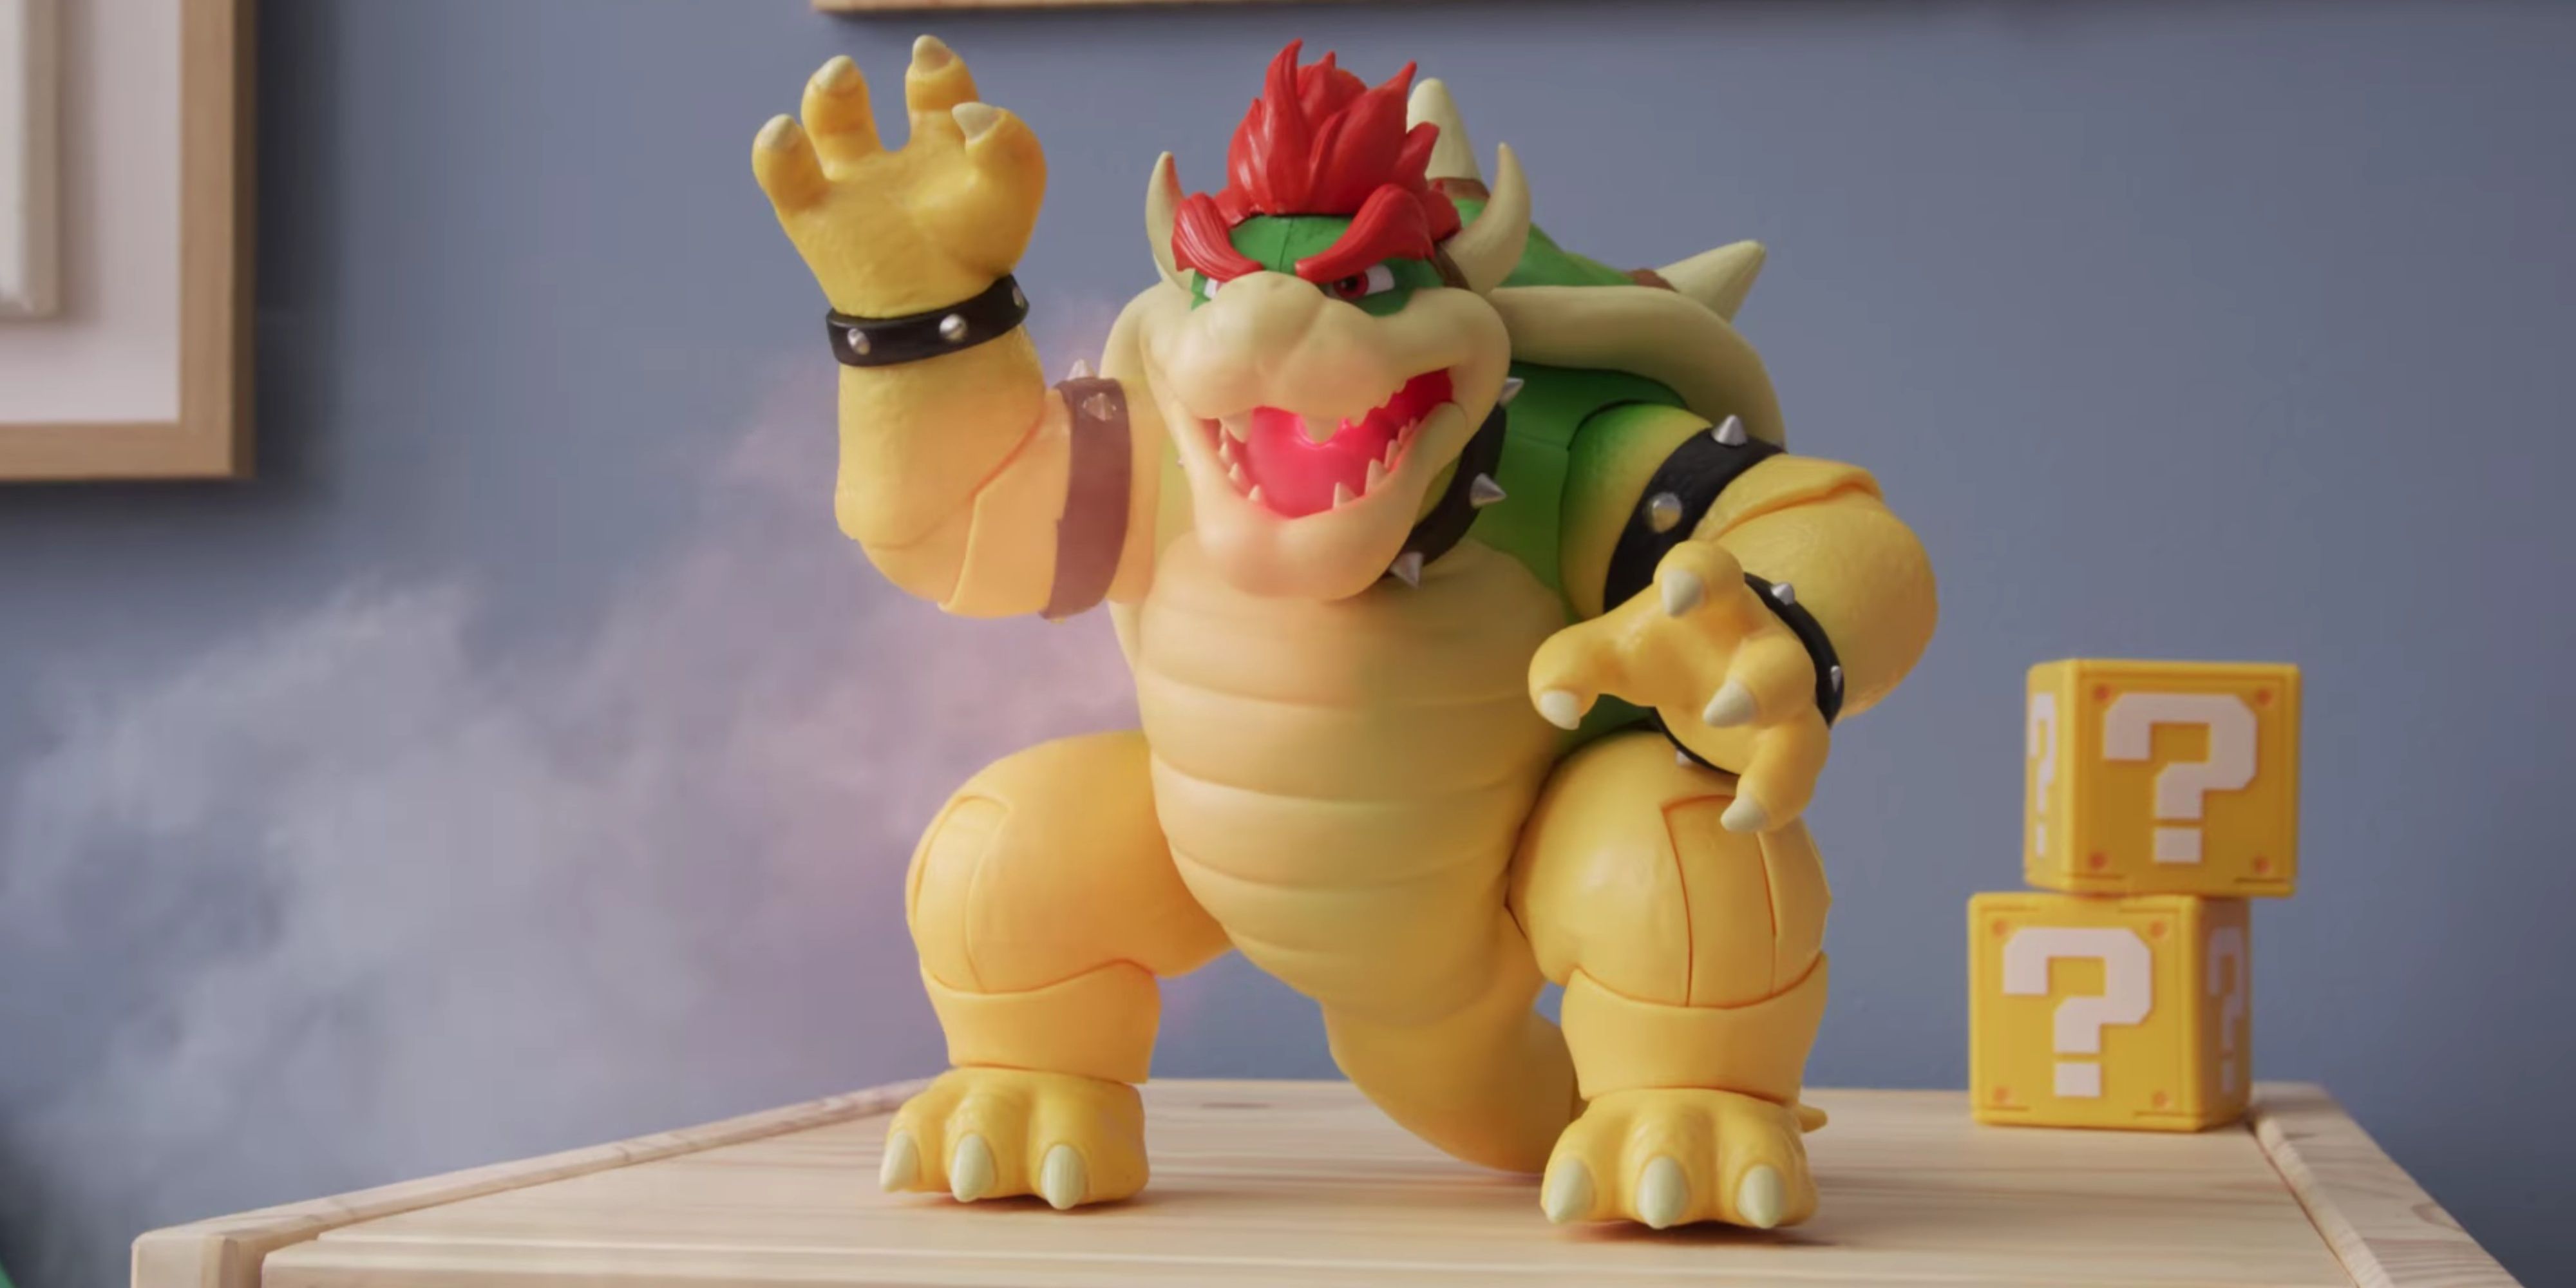 Super Mario's Movie's 'Fire Breathing' Bowser Action Figure On Sale At ...